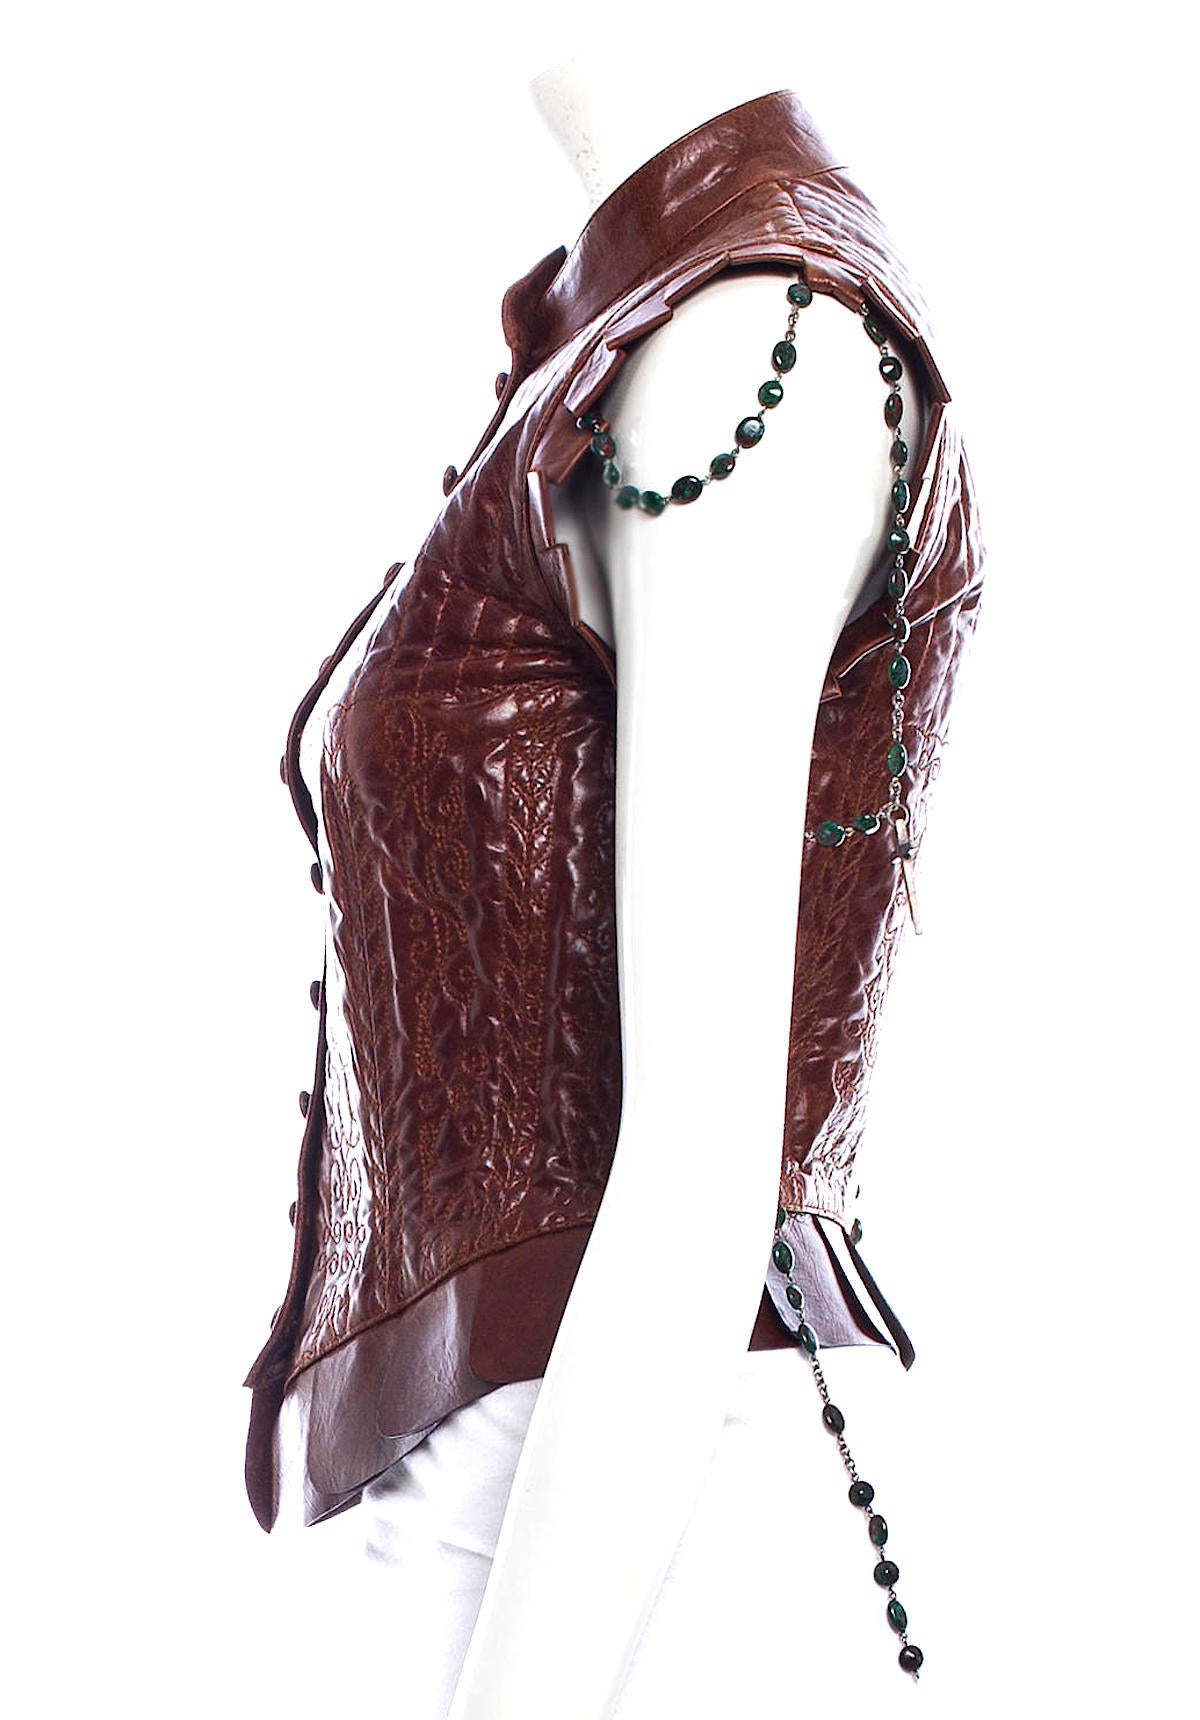 Fierce Alexander McQueen dark brown leather vest from the Spring 2003 Irere Collection and outfit 6 from the runway show. The vest features intricate quilting, front button closure, green gunmetal chain at sleeves, pleated cut out trim, and a